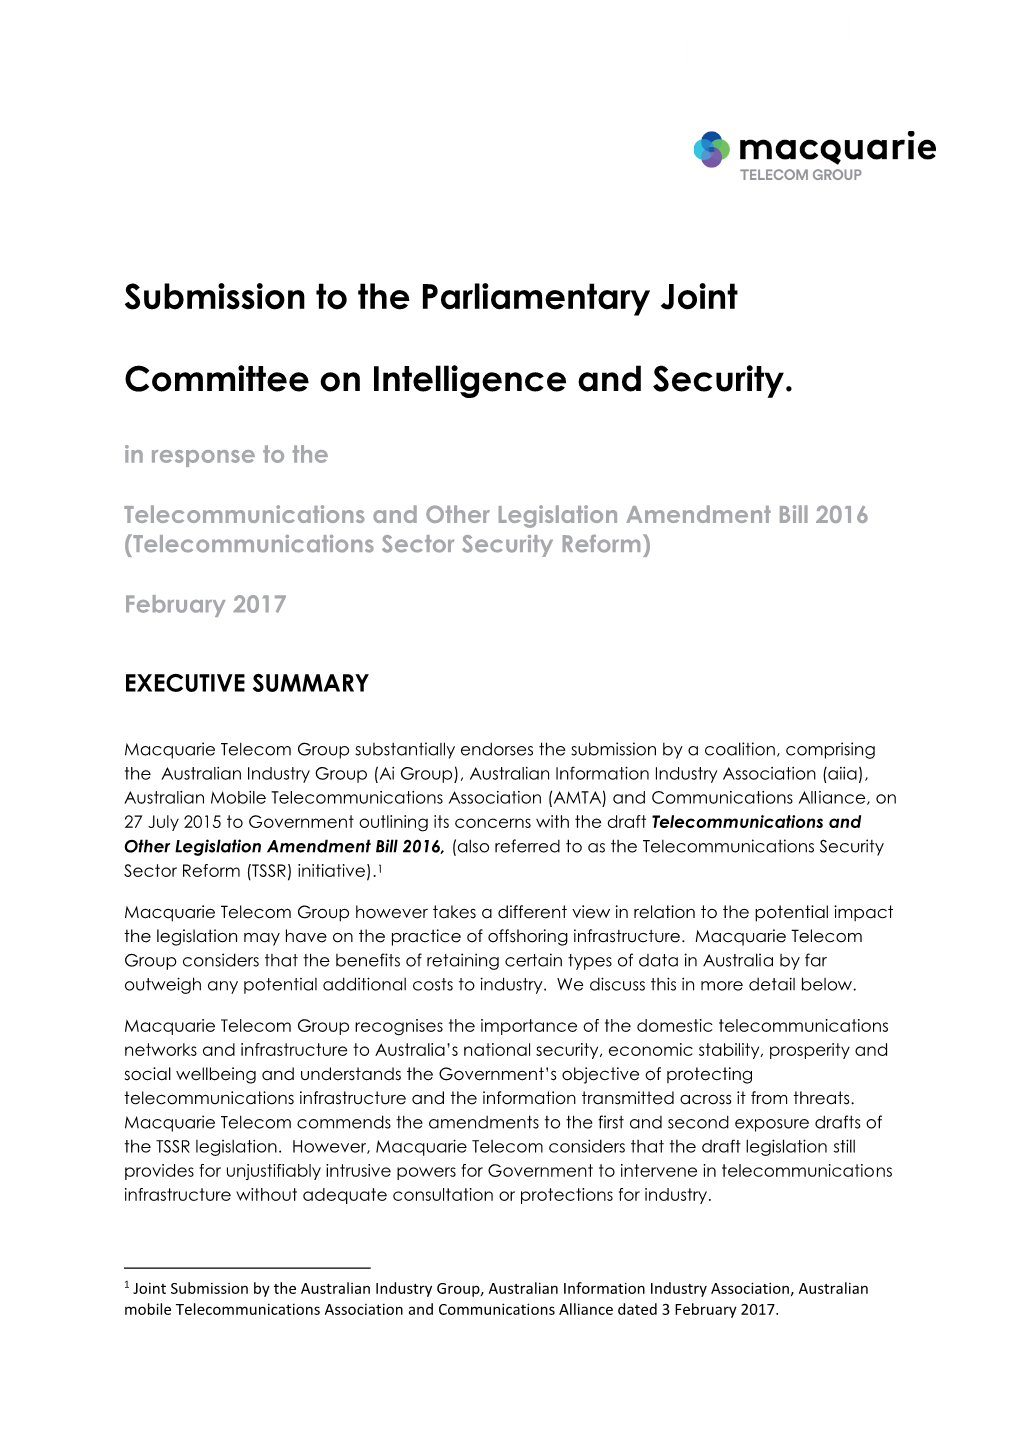 Submission to the Parliamentary Joint Committee on Intelligence And